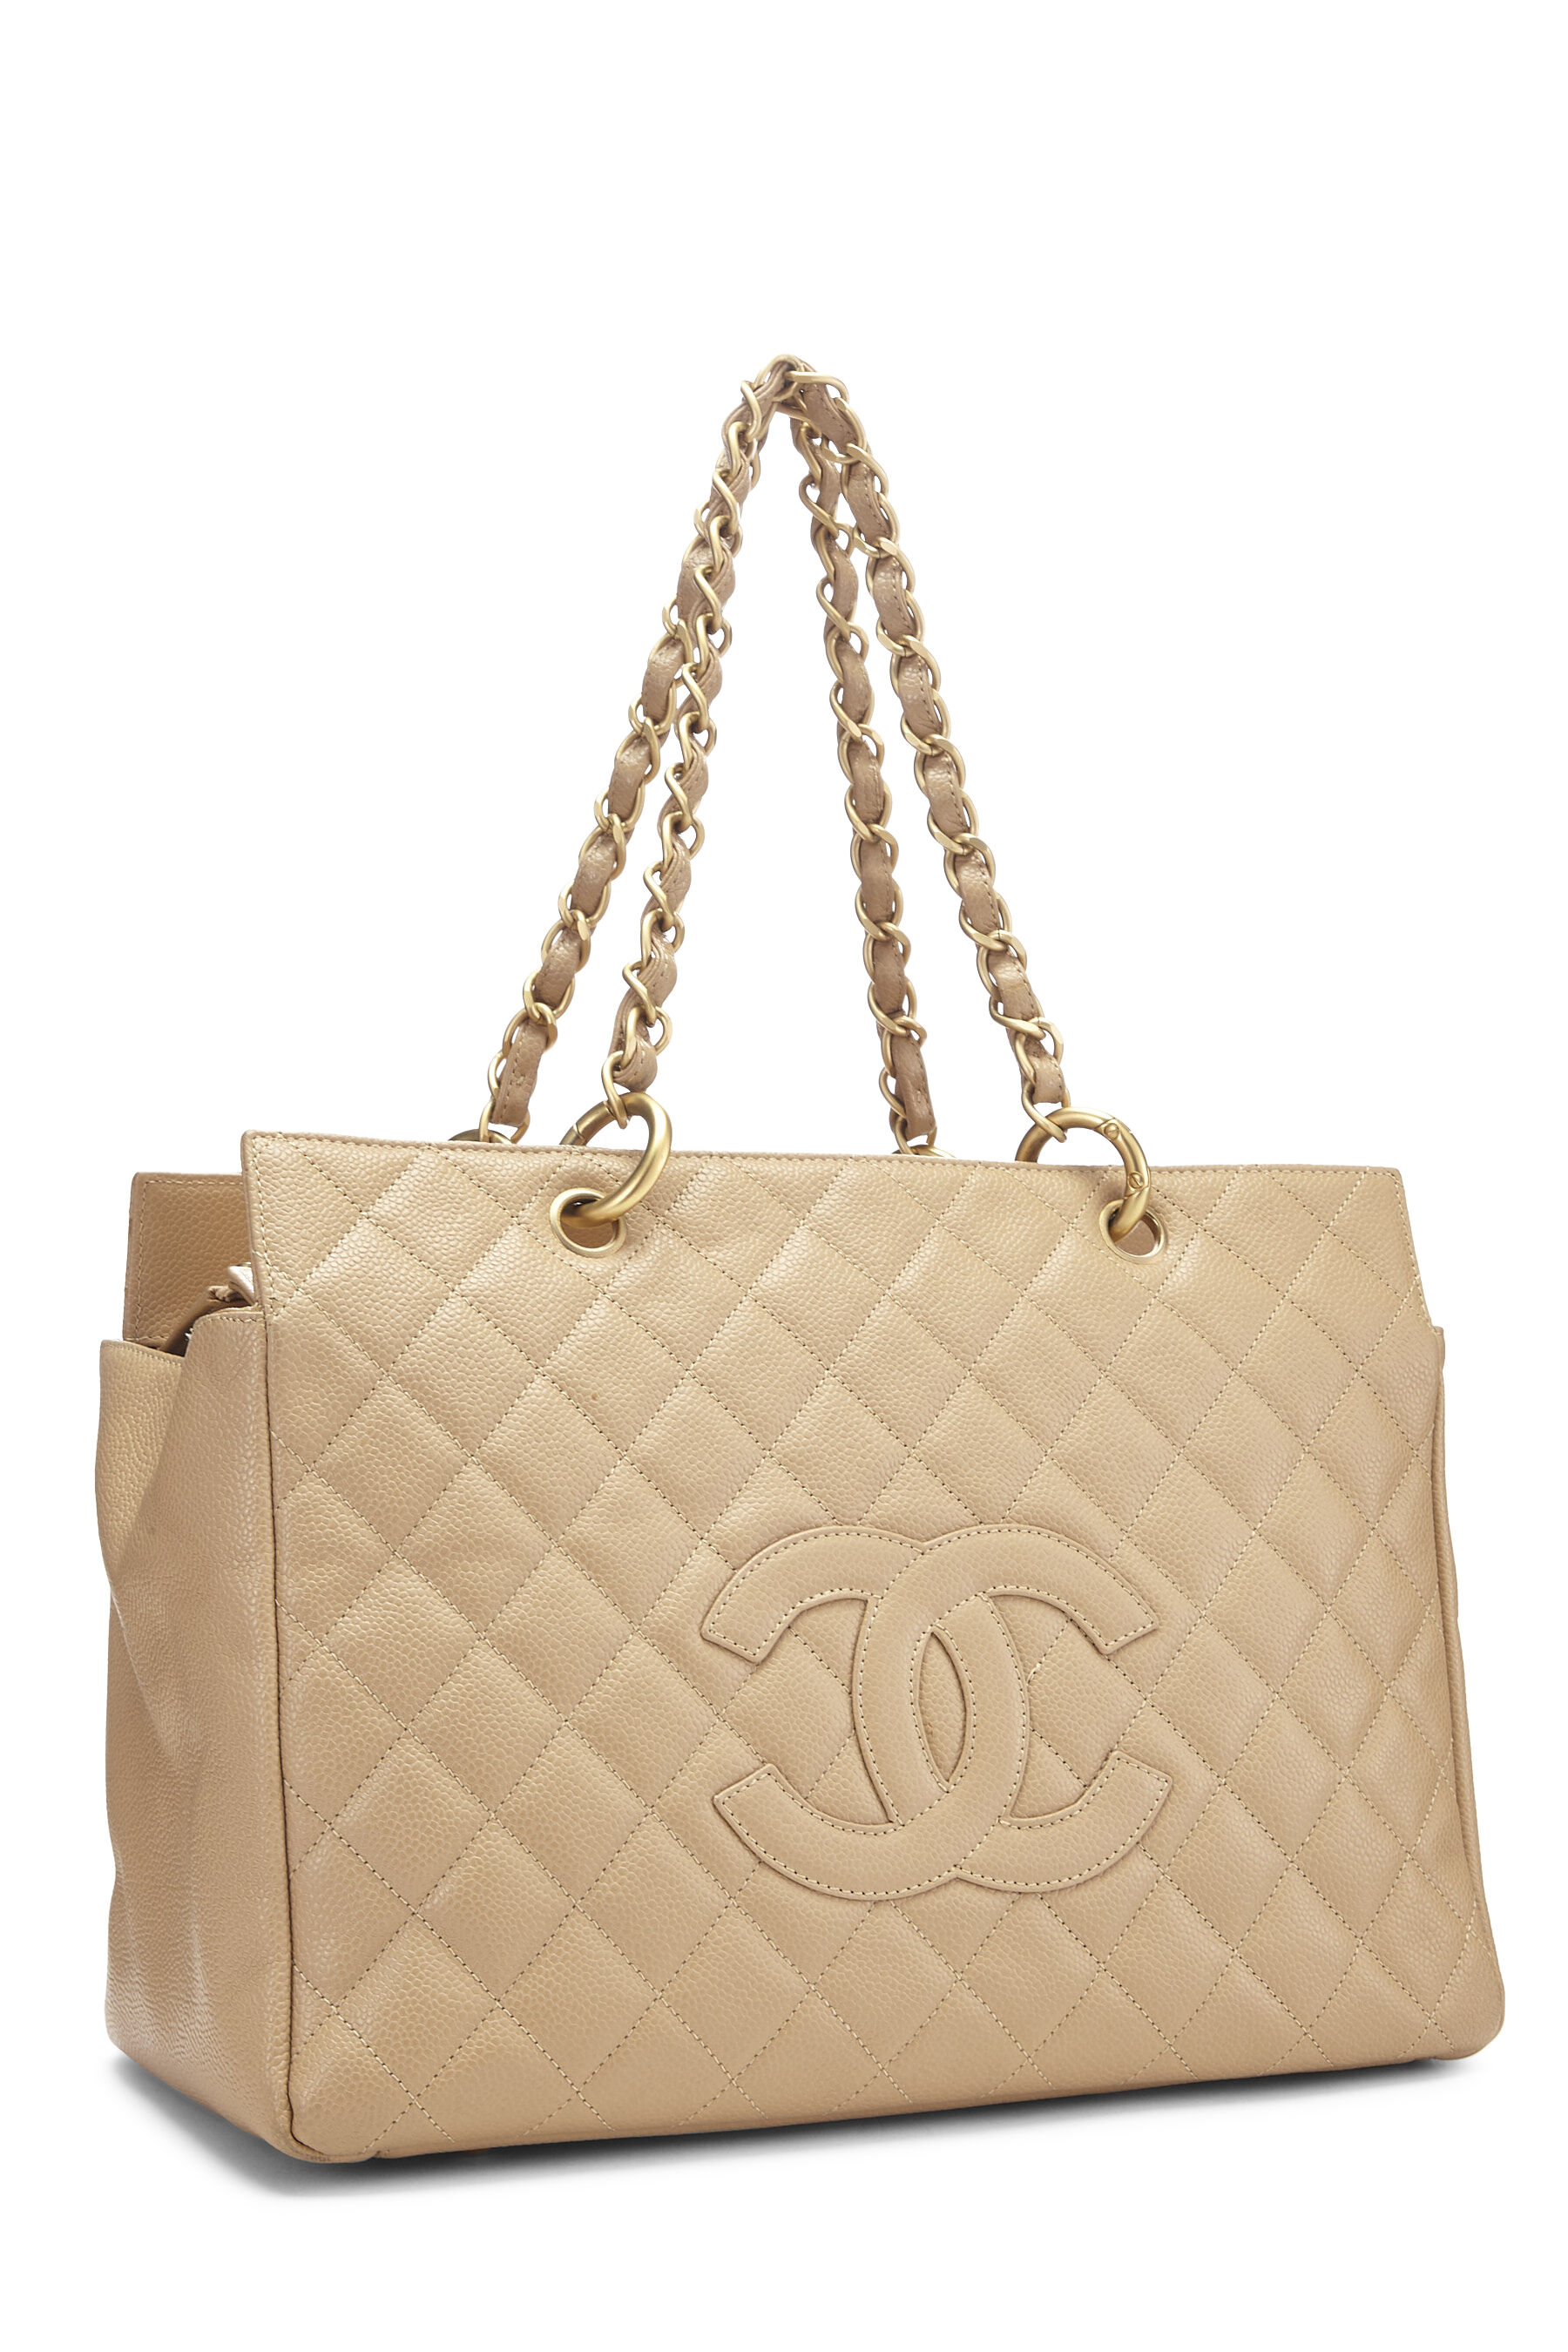 Chanel - Beige Quilted Caviar Timeless 'CC' Tote Medium